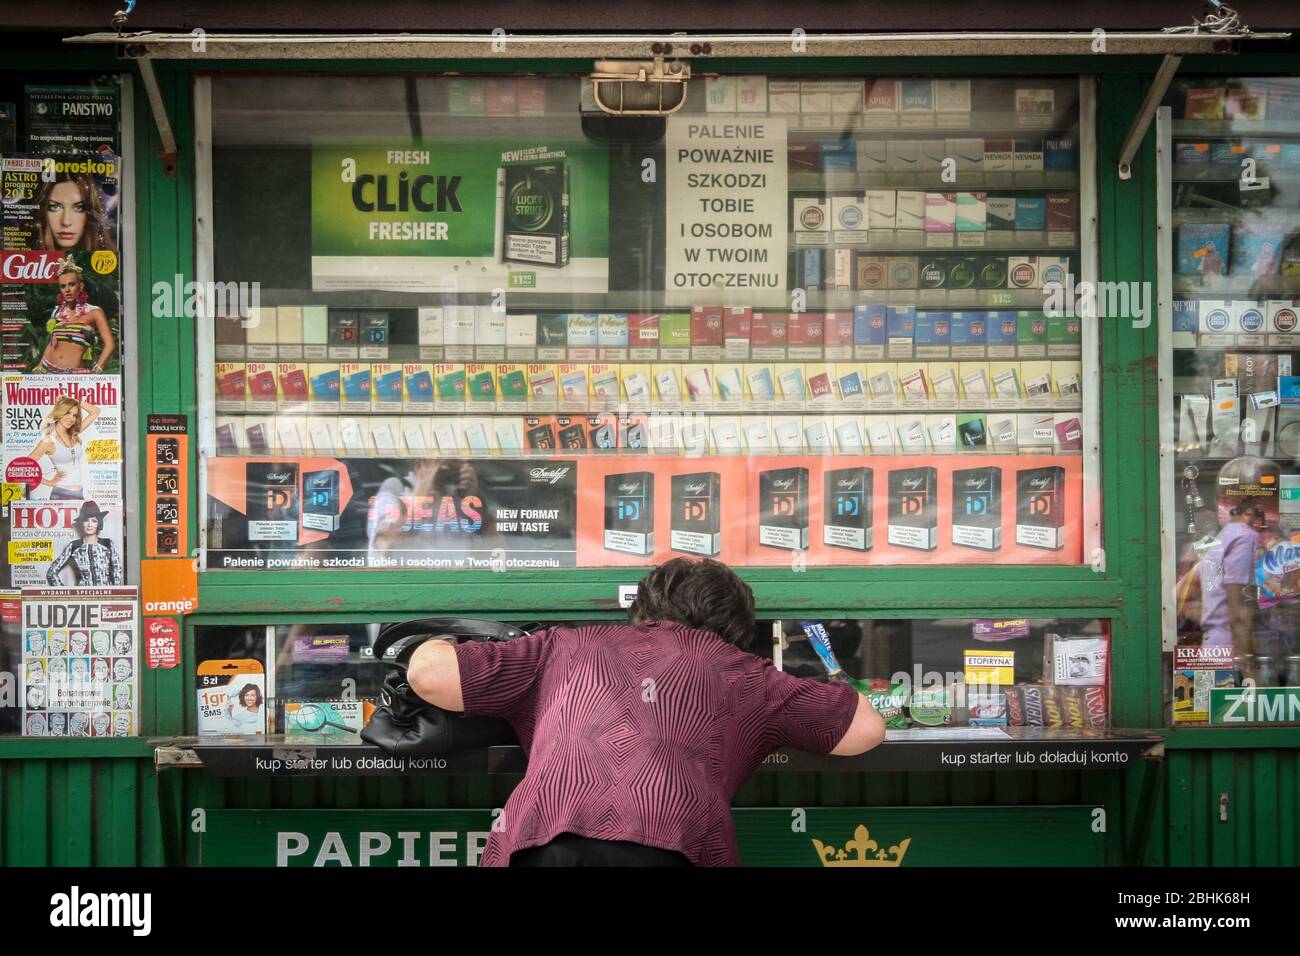 KRAKOW, POLAND - MAY 9, 2013: Woman discussing in front of a Trafika, a  typical kiosk from Poland selling basic needs, tobacco products and  cigarettes Stock Photo - Alamy